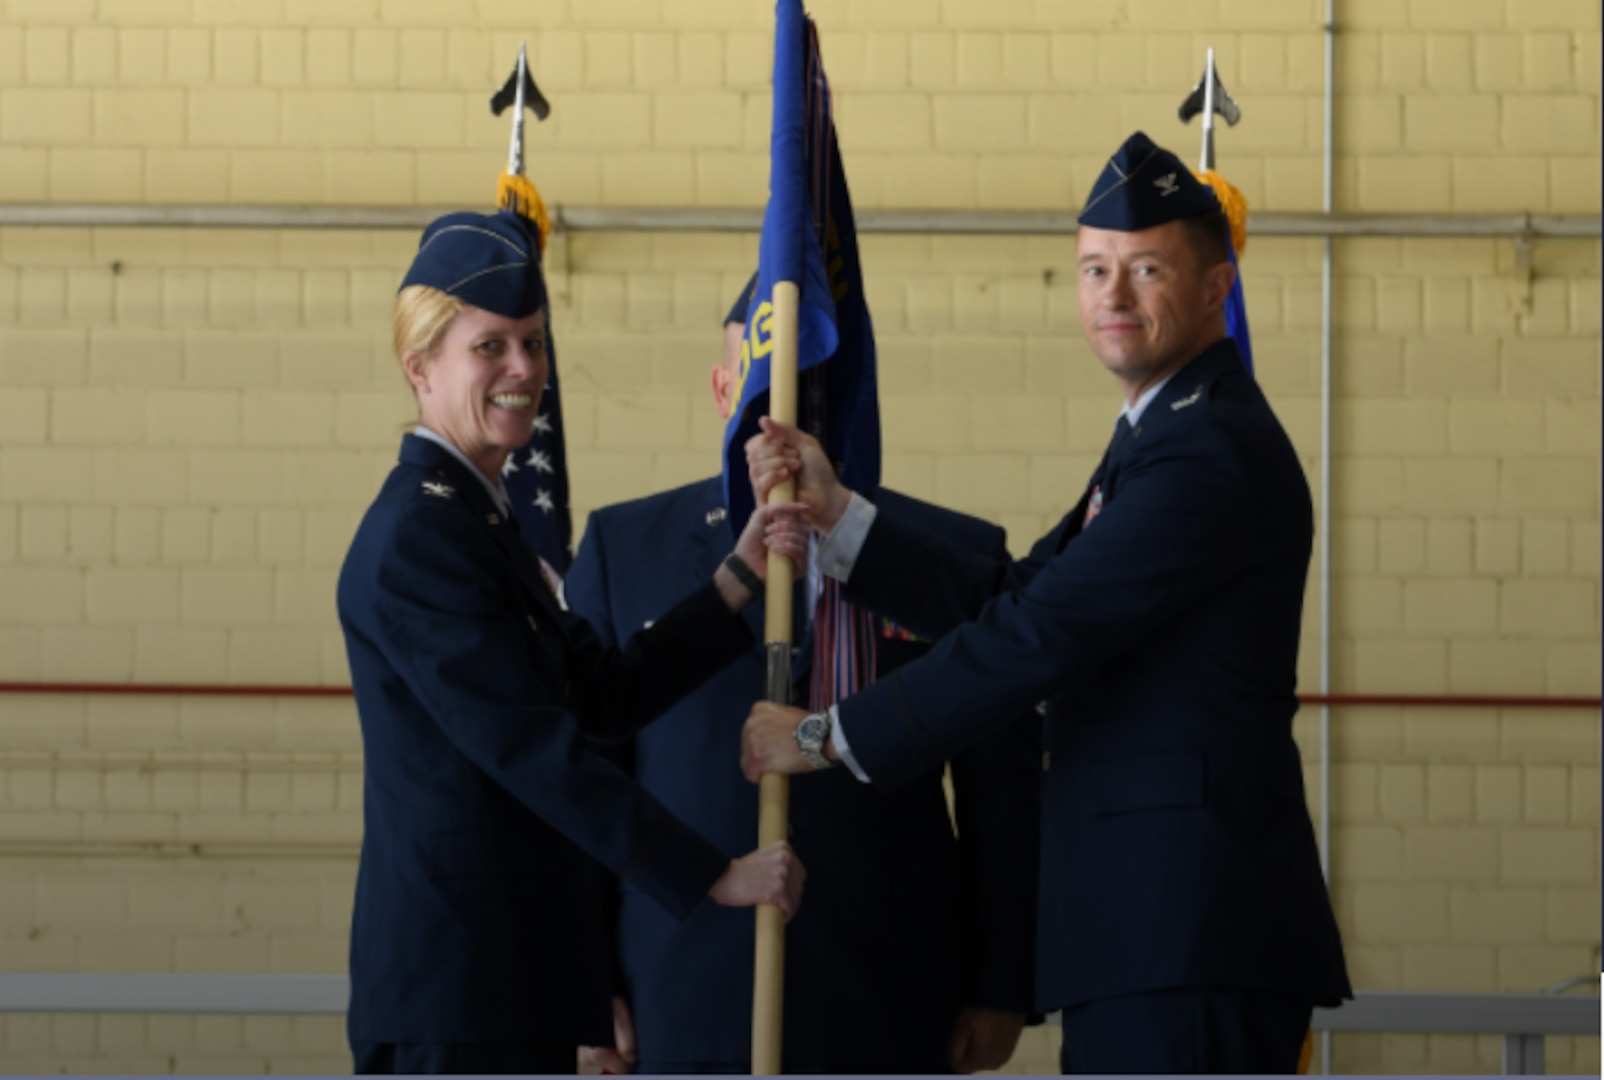 Col. Christopher Backus receives the 55th Medical Group guidon from Col. Kristen D. Thompson, 55th Wing commander, during a change of command ceremony June 8 at Offutt Air Force Base, Nebraska. Backus became the newest commander of the 55 MDG. (U.S. Air Force photo by Charles Haymond)

PHOTO BY: Charles Haymond